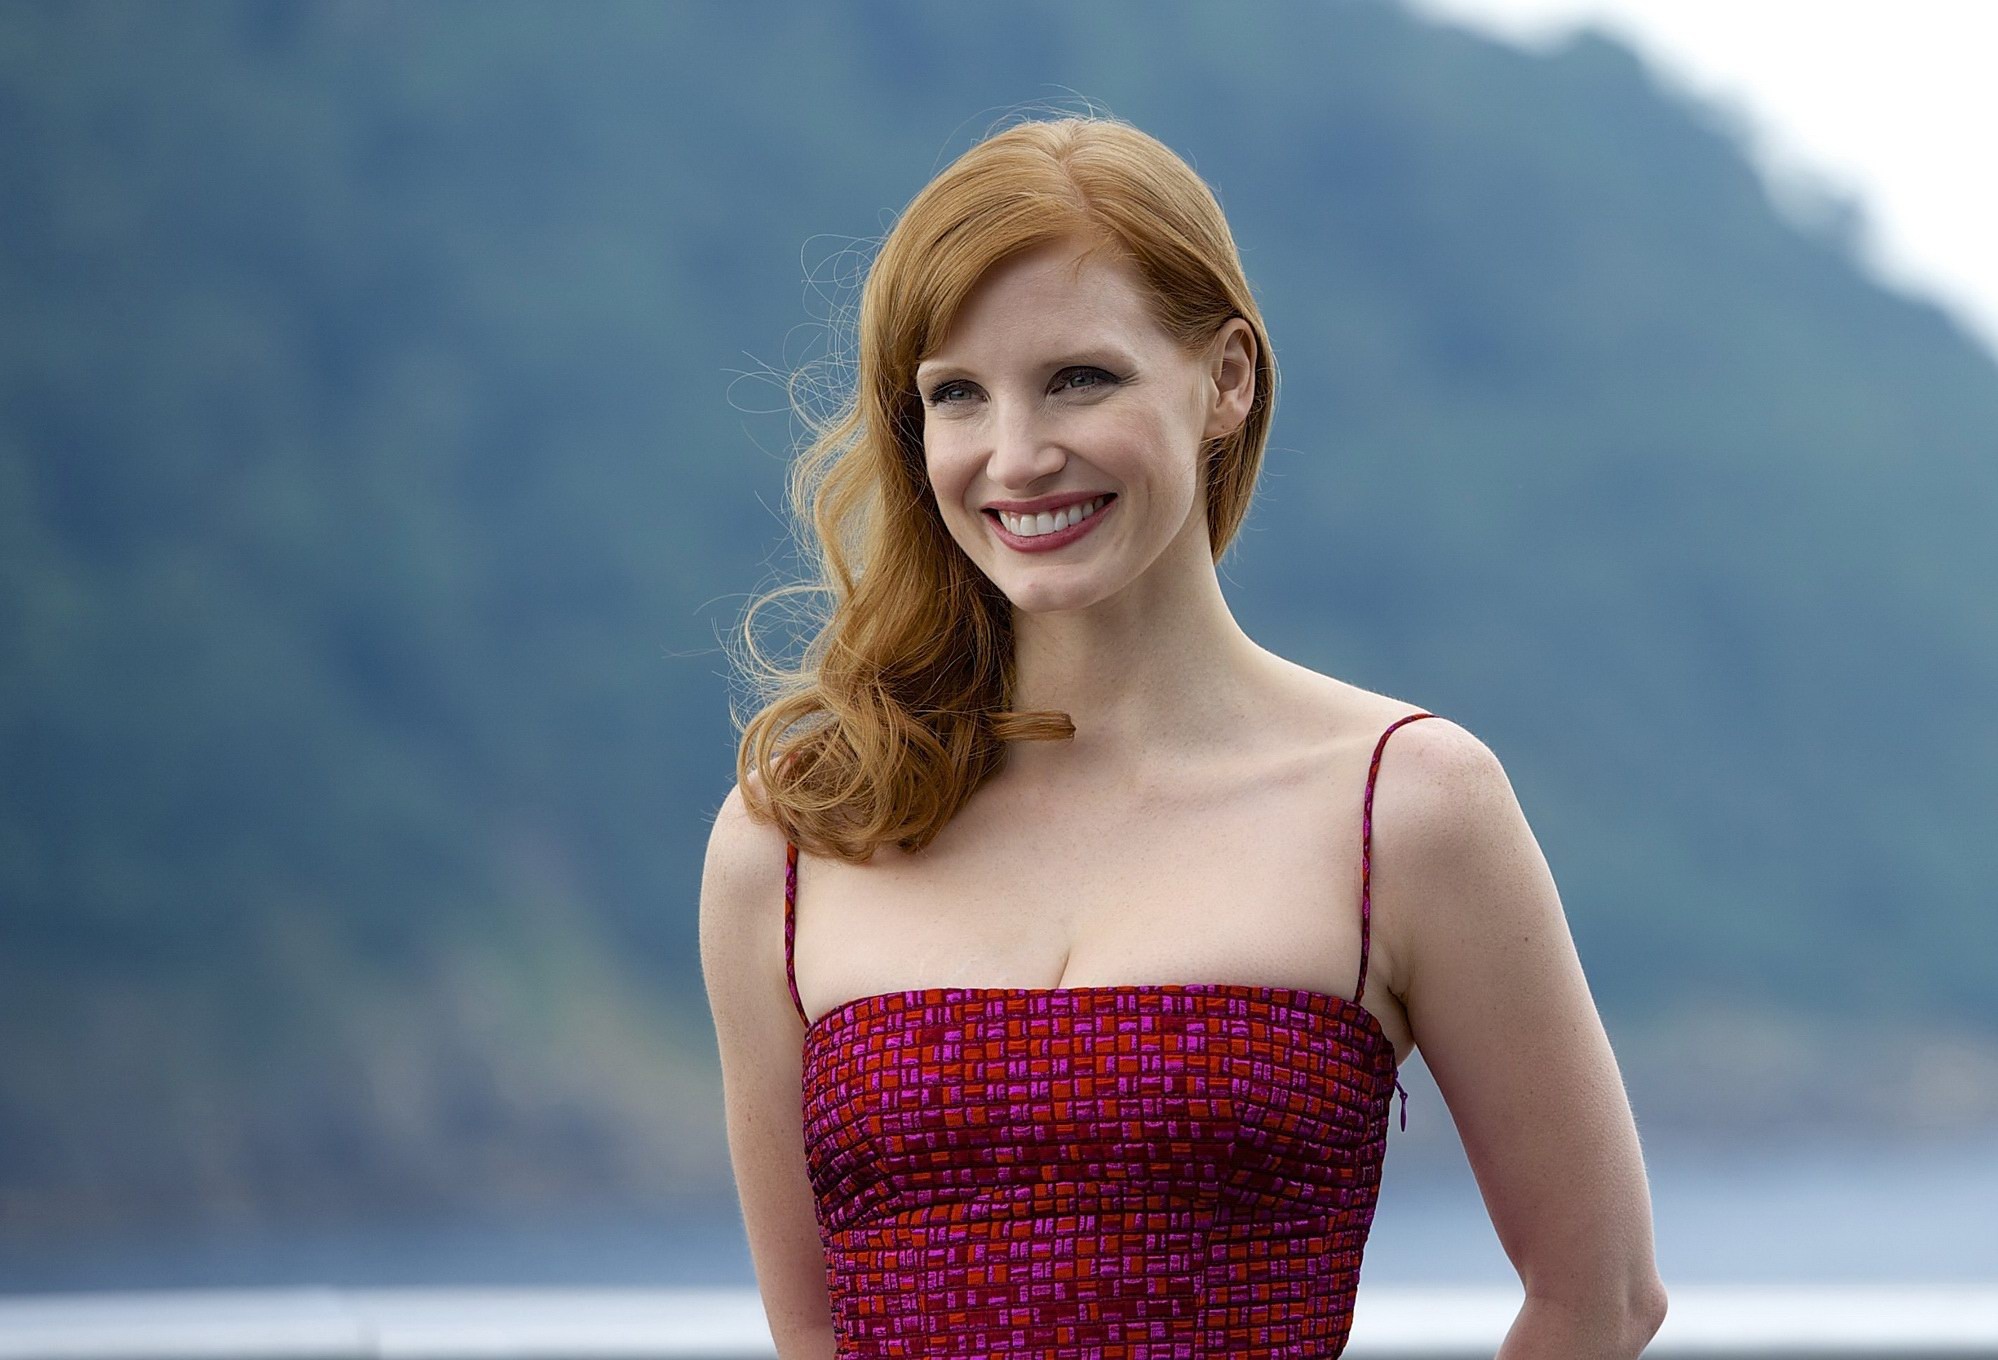 Jessica Chastain showing cleavage at The Dissapearance of Eleanor Rigby photocal #75184928